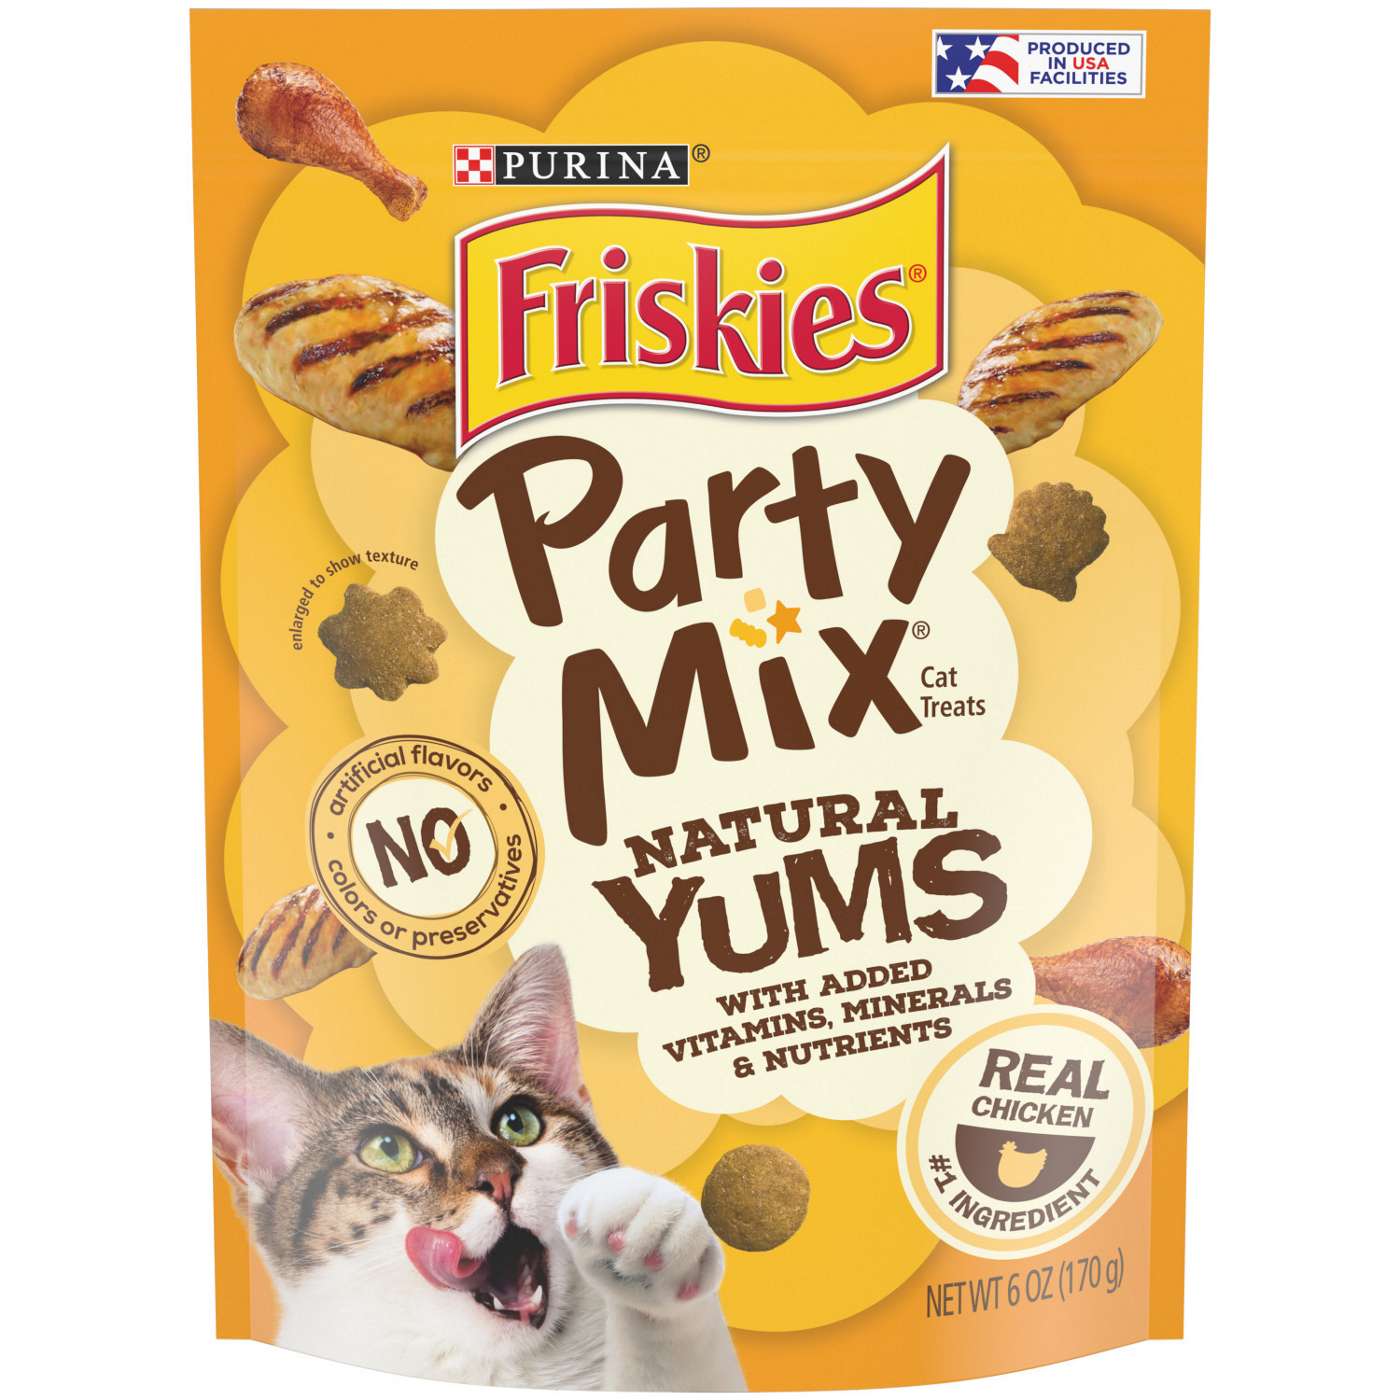 Friskies Purina Friskies Natural Cat Treats, Party Mix Natural Yums With Real Chicken & Vitamins, Minerals & Nutrients; image 1 of 6